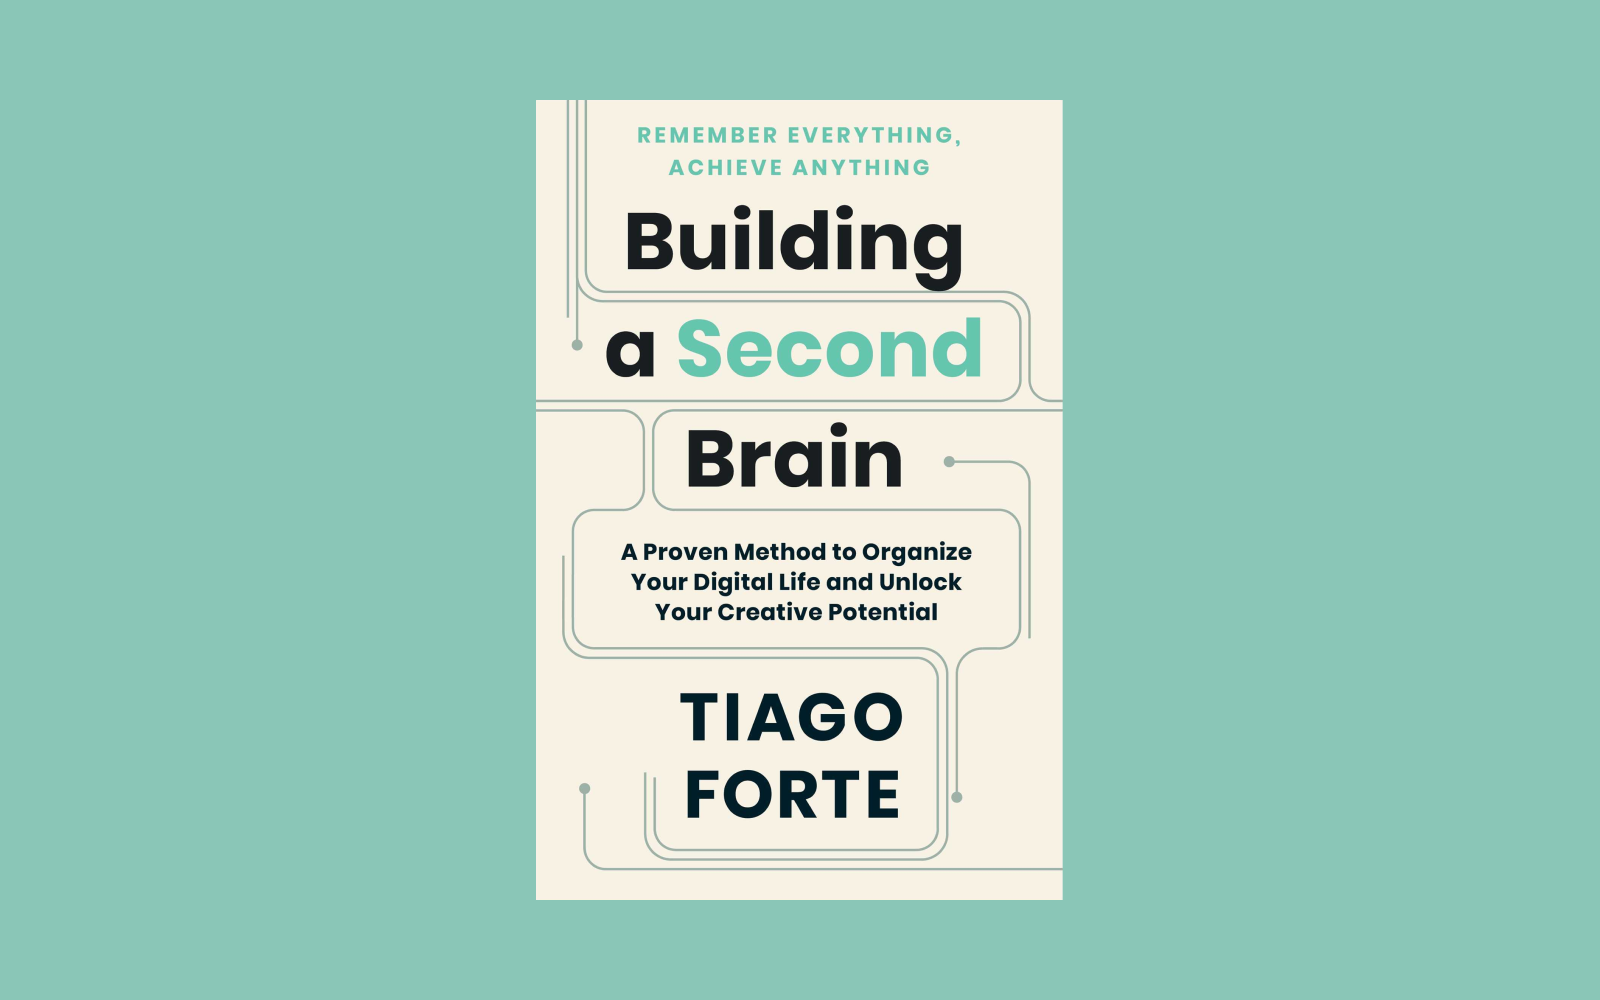 Building a Second Brain book cover